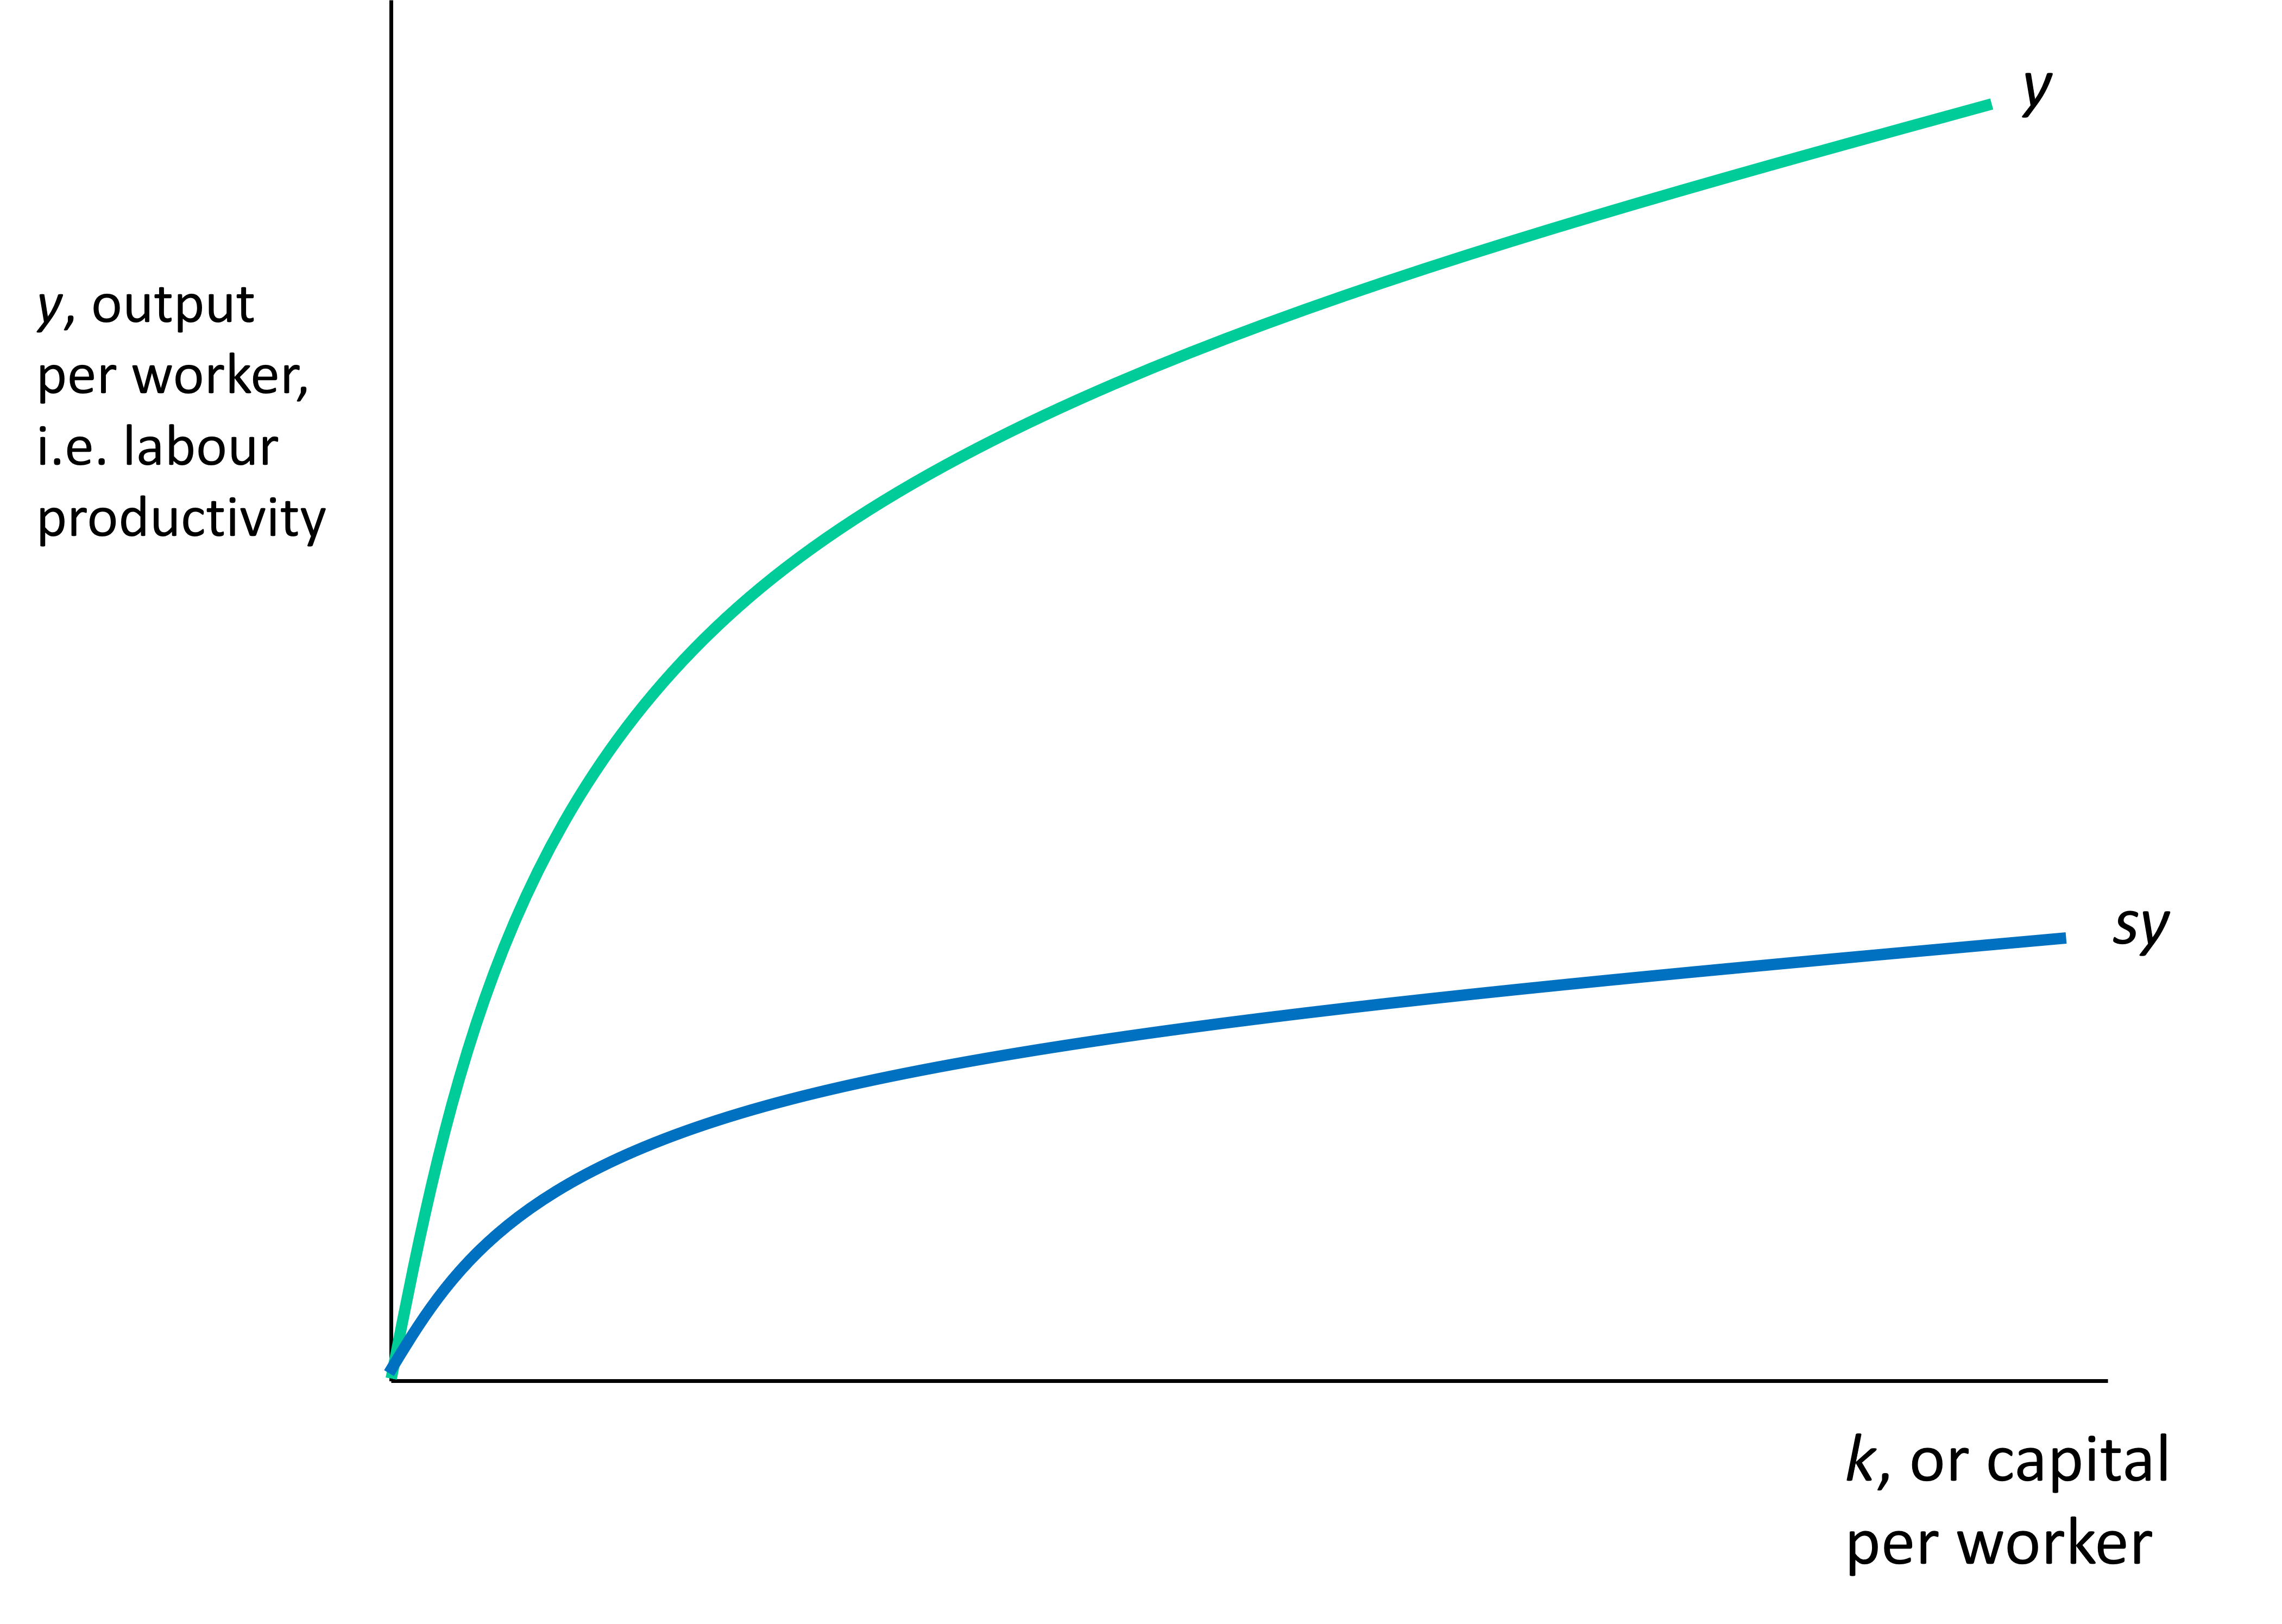 Figure 18-2 is identical to Figure 18-1 except there is a new line s*y which is similarly-shaped but significantly lower than curve y.